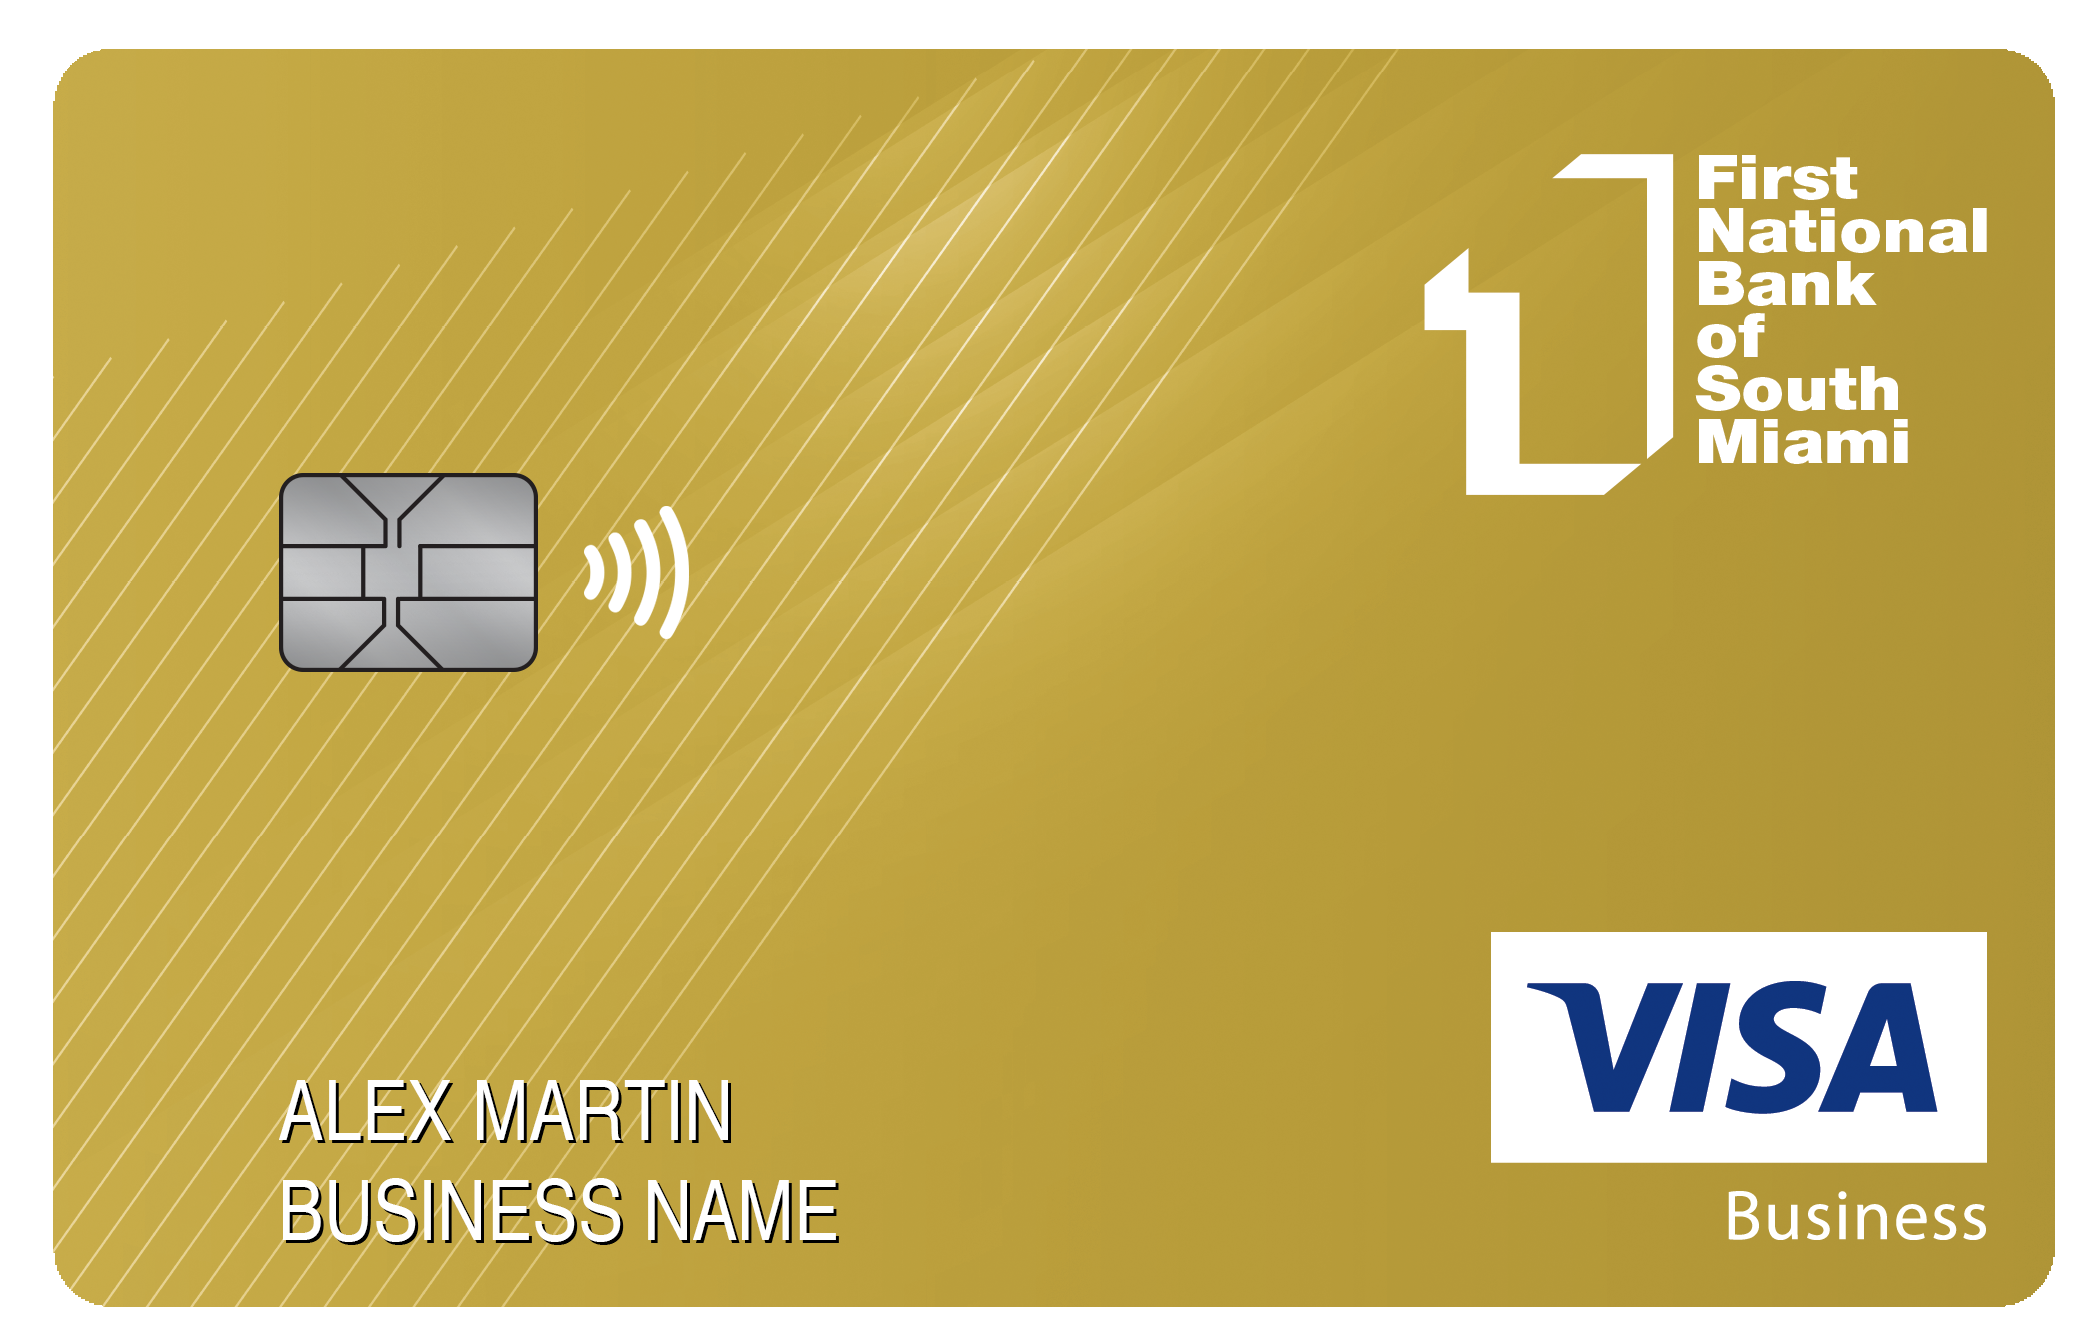 First National Bank of South Miami Business Cash Preferred Card